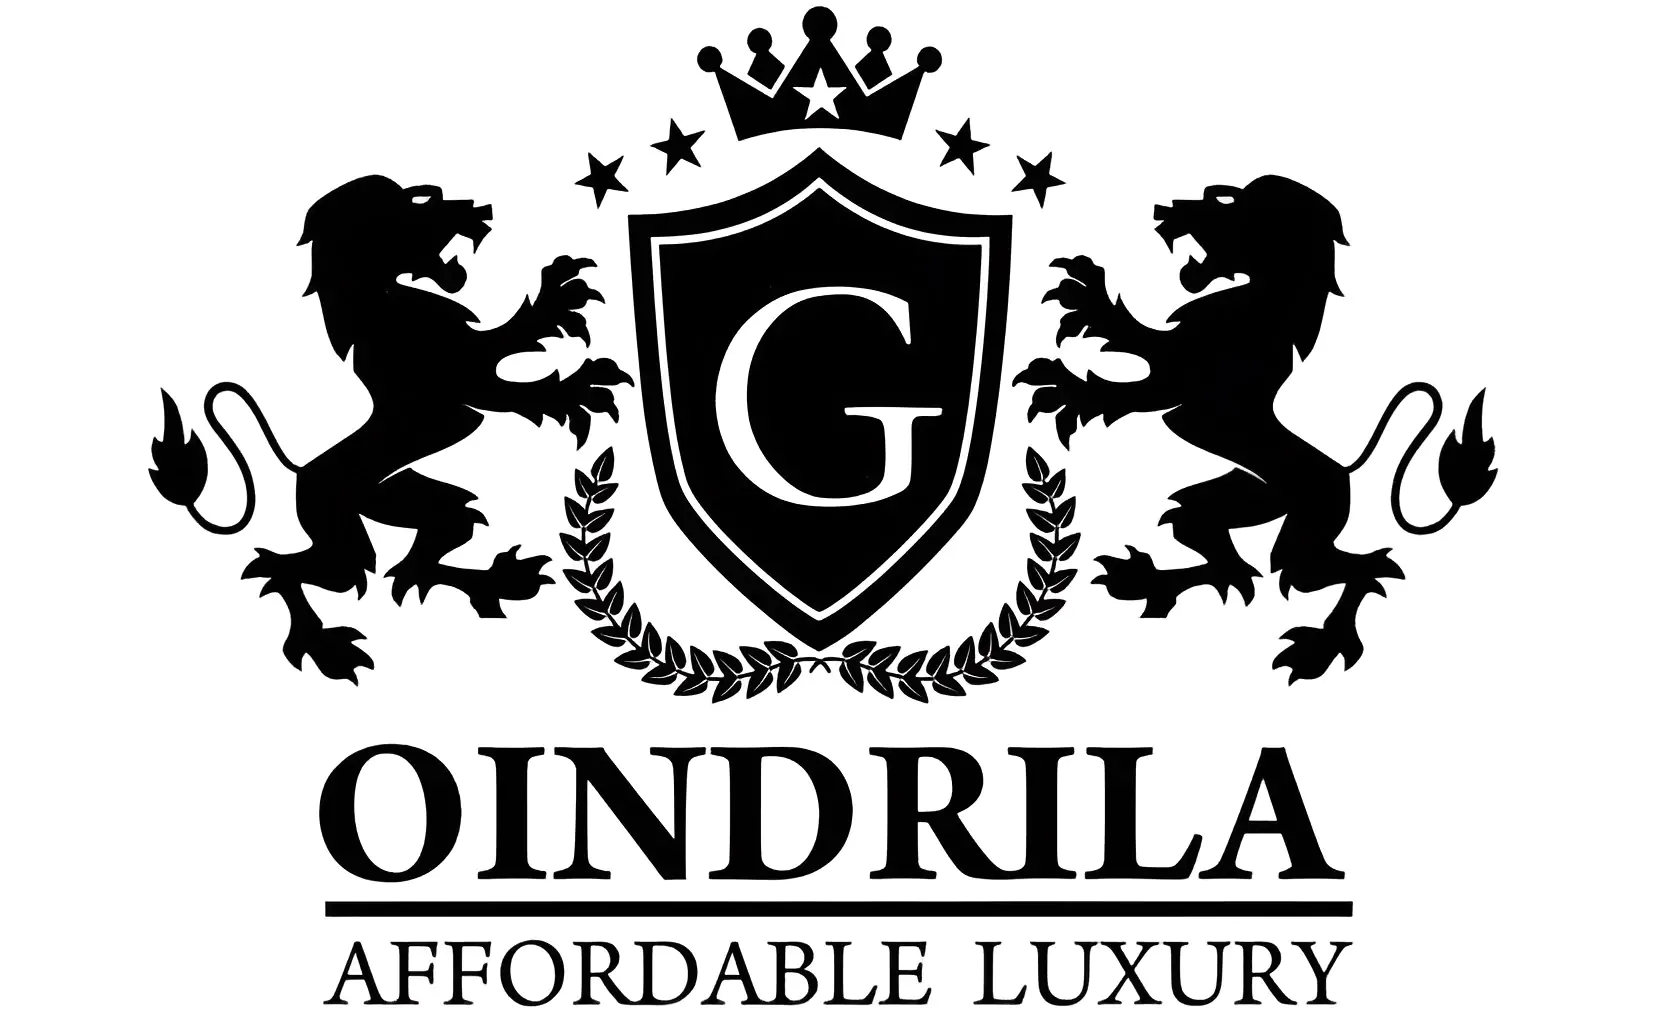 G Oindrila Affordable Luxury